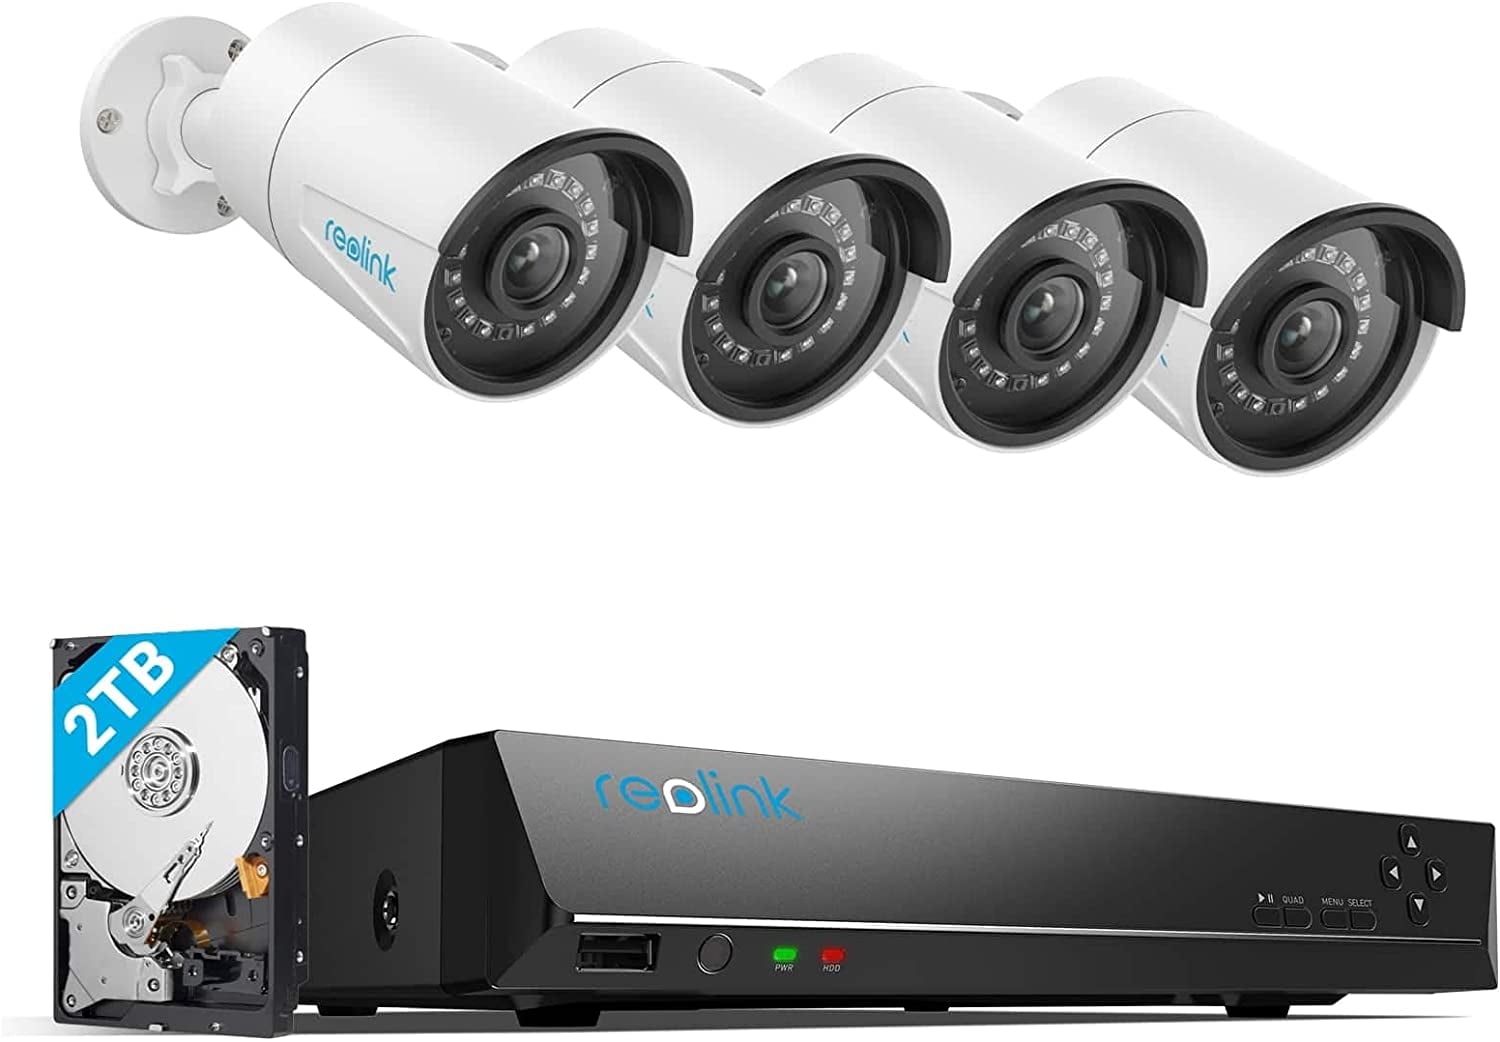 Reolink 8CH 5MP POE Home Security Camera System, 4pcs 5MP Outdoor POE  Cameras, 8MP 8CH POE NVR with 2TB HDD for 24/7 Recording, RLK8-410B4-5MP 